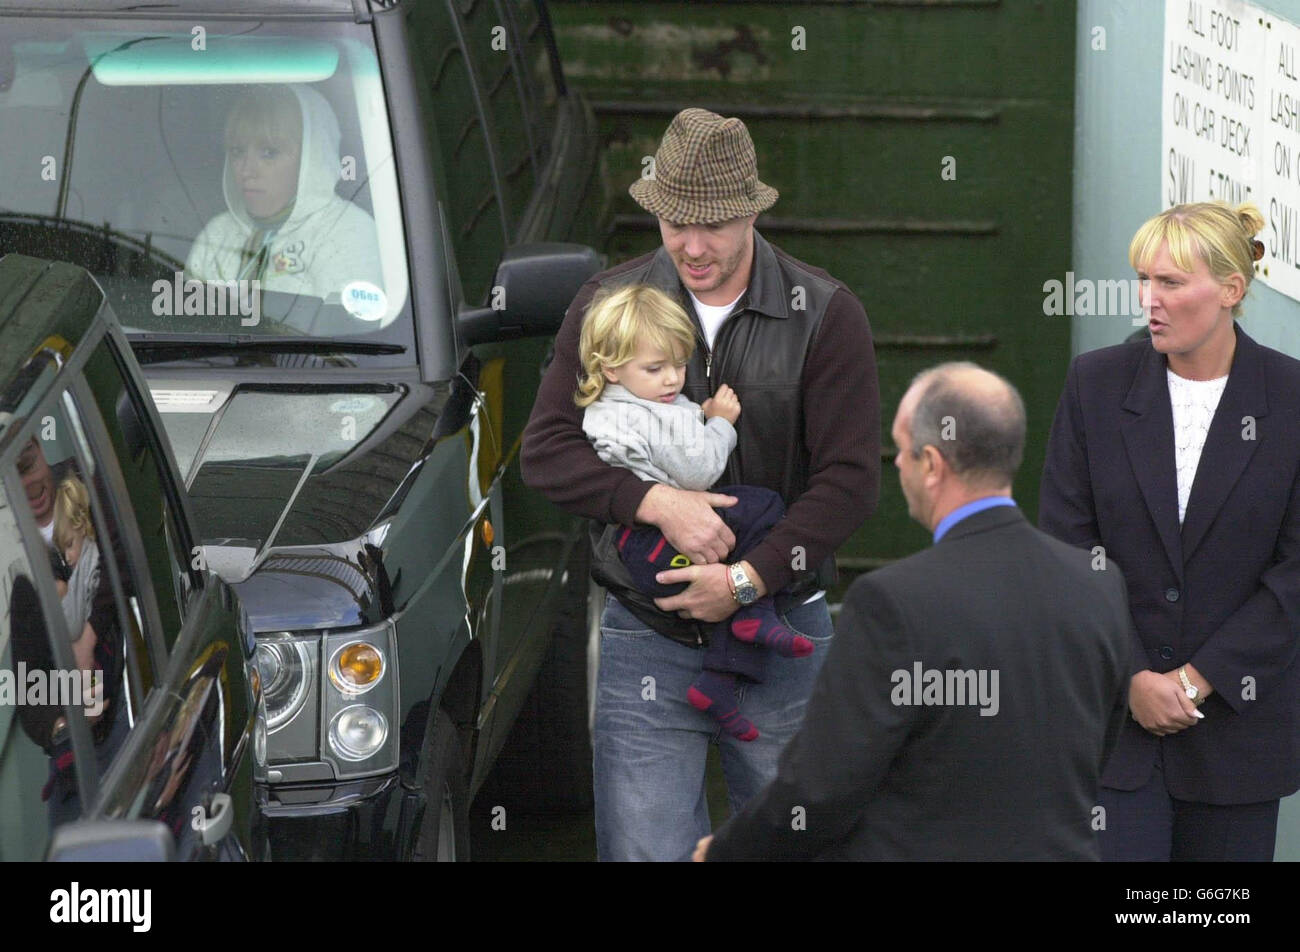 Guy Ritchie and son Rocco on ferry en route to Mount Stuart on the Scottish island of Bute, where it is understood designer Stella McCartney will celebrate her wedding this weekend. Ritchie, his wife Madonna, as well as model Kate Moss, Chrissie Hynde, and Coldplay's Chris Martin were aboard a CalMac ferry which pulled into Rothesay harbour at around 7.35pm. However, it was still unclear where the wedding service itself will be held or whether Miss McCartney, 31, is on the island. It was thought she may be married to husband-to-be Alasdhair Willis on the Mull of Kintyre, a favourite haunt of Stock Photo